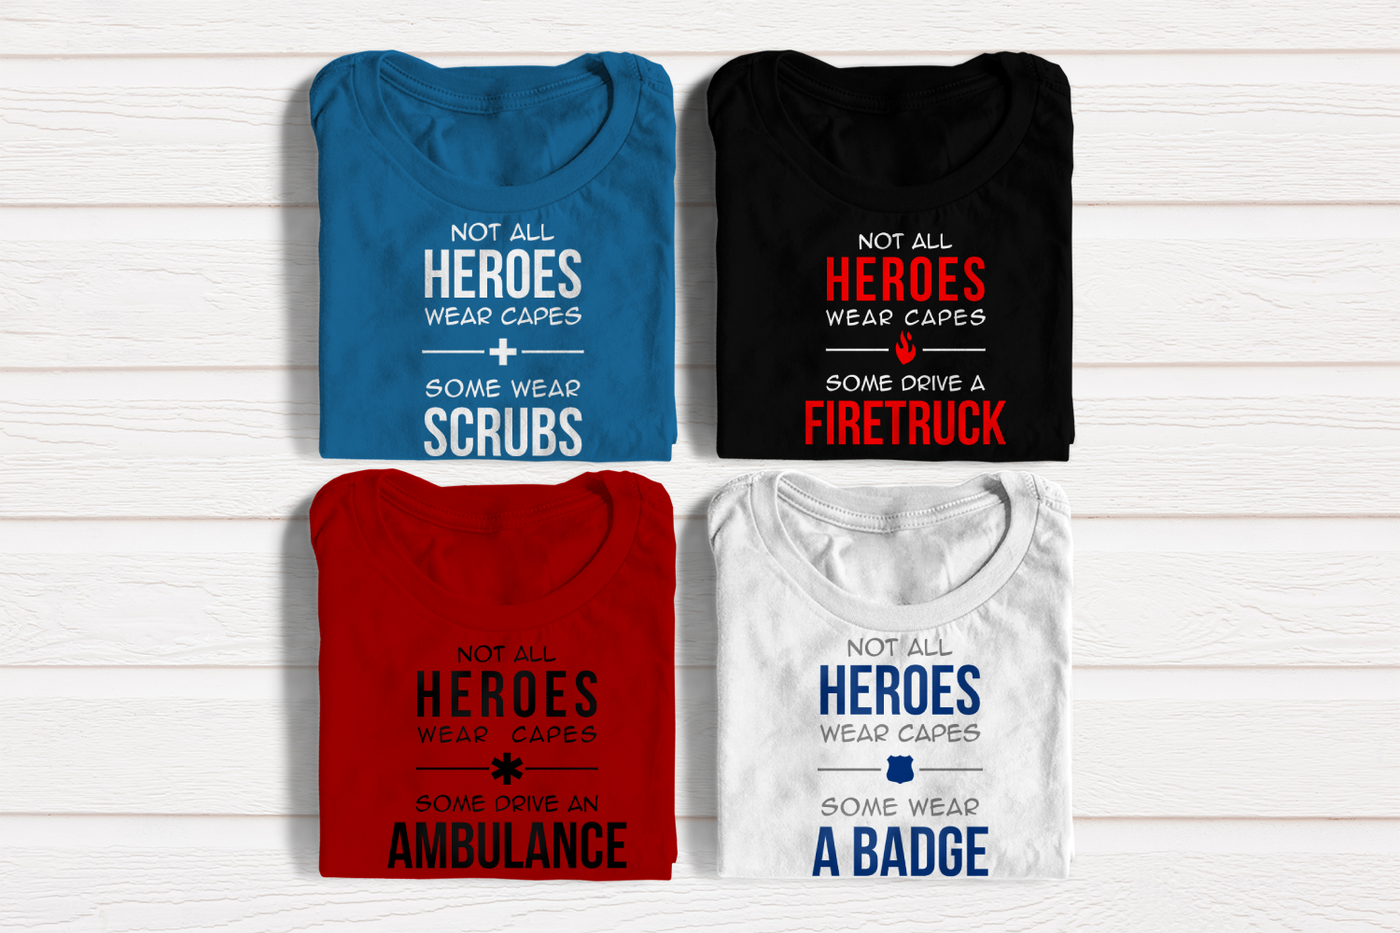 Four "not all heroes wear capes" designs. Includes themes for various emergency professionals, such as medical staff, ambulance workers, police, and fire fighters.